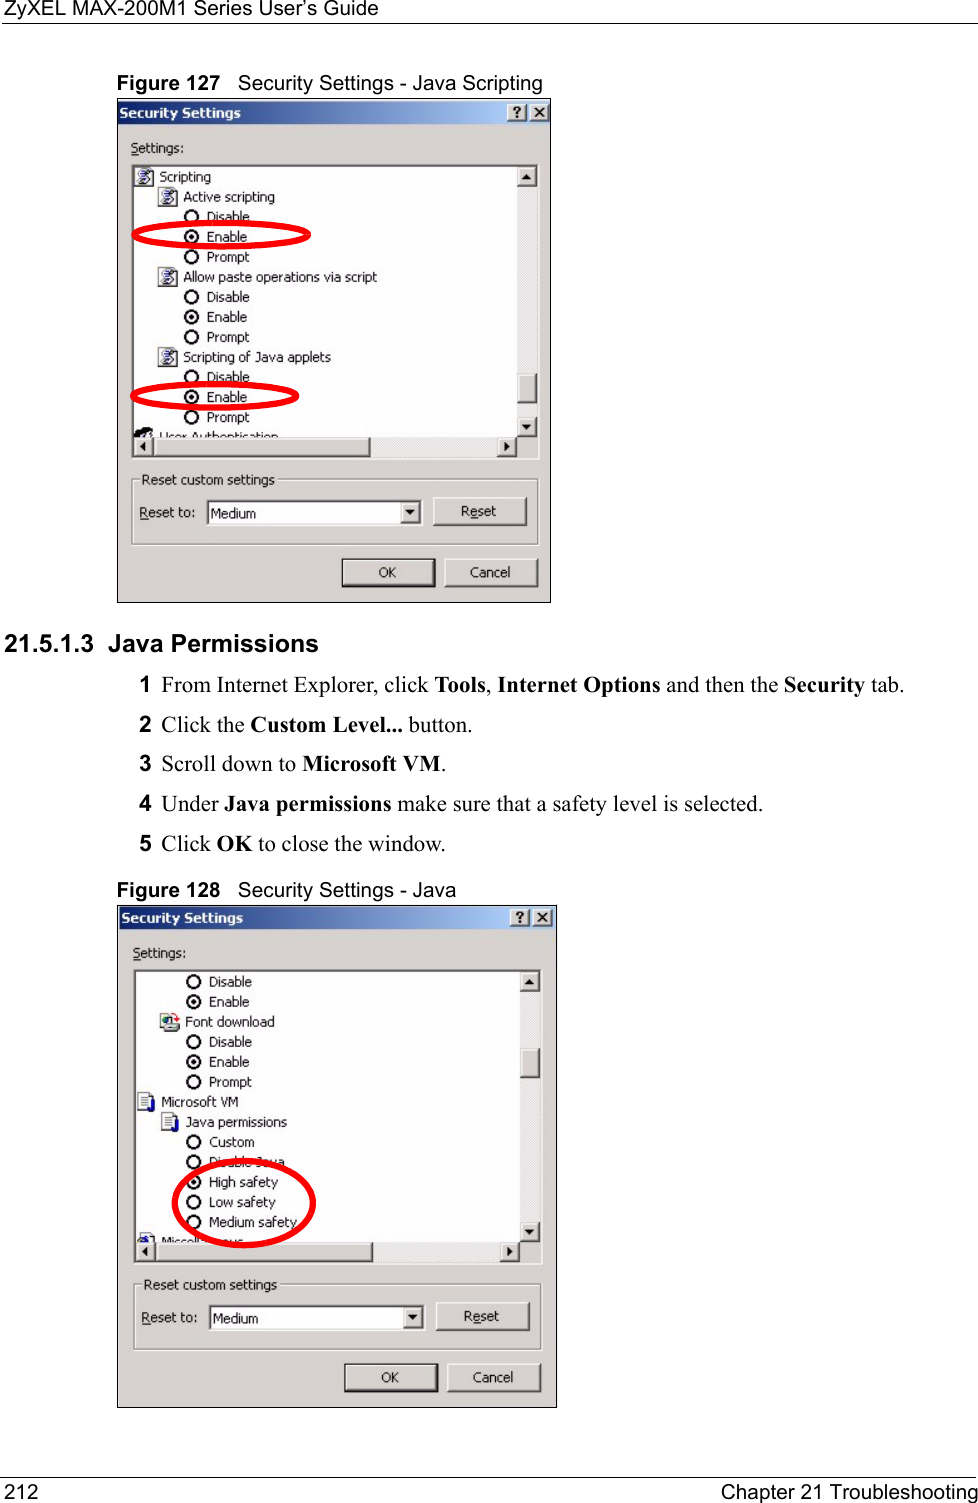 ZyXEL MAX-200M1 Series User’s Guide212 Chapter 21 TroubleshootingFigure 127   Security Settings - Java Scripting21.5.1.3  Java Permissions1From Internet Explorer, click Tools, Internet Options and then the Security tab. 2Click the Custom Level... button. 3Scroll down to Microsoft VM. 4Under Java permissions make sure that a safety level is selected.5Click OK to close the window.Figure 128   Security Settings - Java 